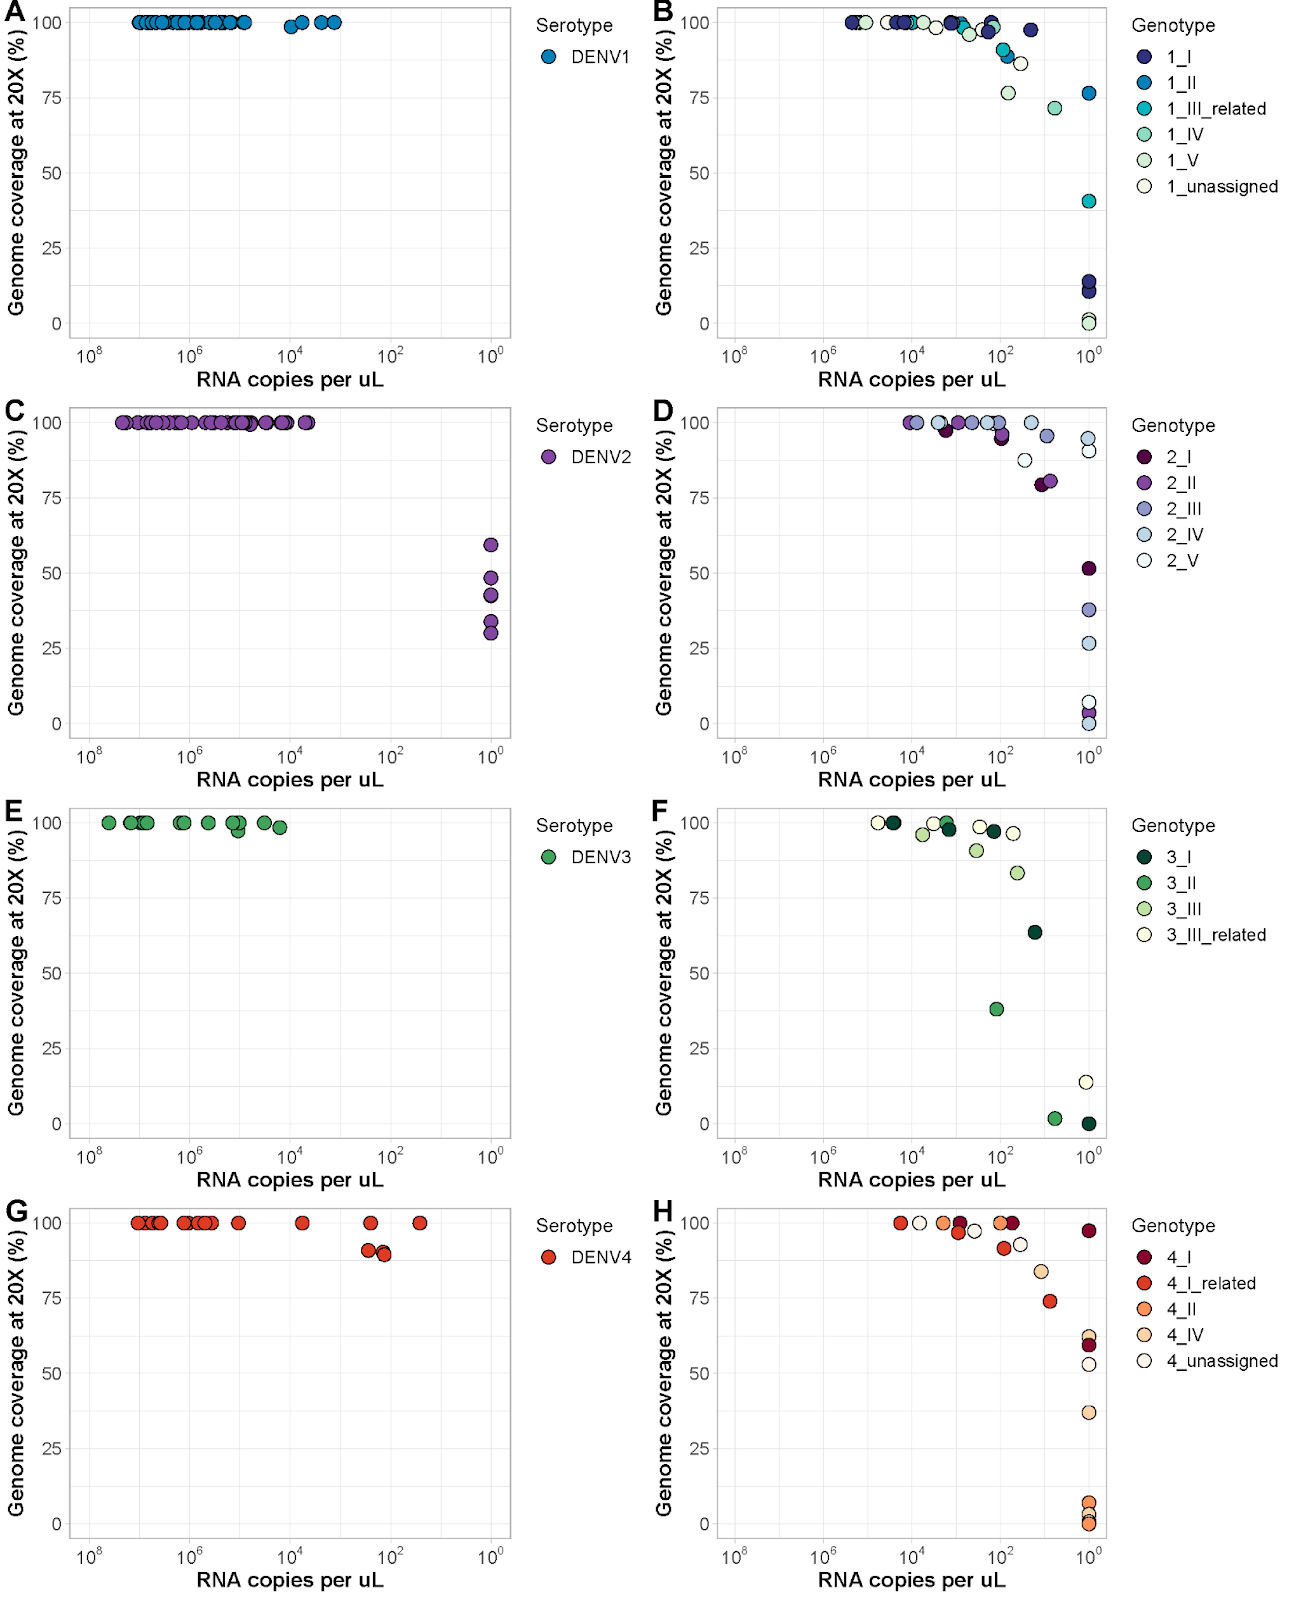 Figure 1: Serotype-specific primers - Percent genome coverage of undiluted and diluted dengue virus stocks sequenced with the serotype-specific amplicon-based sequencing approach. Dengue virus serotypes were determined using the CDC real-time RT-PCR assay. Viruses spanning the various genotypes within each serotype were sequenced with the serotype-specific primer schemes using the Illumina COVIDSeq Test (RUO version). Consensus genomes were generated at a depth of coverage of 20X using iVar (version 1.3.1). Genome coverage at 20X for undiluted dengue virus serotype 1 (A), 2 (C), 3 (E), and 4 (G) virus stocks. Each dot represents a different dengue virus stock. Genome coverage at 20X for selected dengue virus serotype 1 (B), 2 (D), 3 (F), and 4 (H) virus stocks diluted until no longer detected by the CDC real-time RT-PCR assay. Dots represent dengue virus stocks diluted to different concentrations. Some samples have high coverage, while not detected by the real-time RT-PCR assay, which is due to mismatches with the primer or probe sequences (lower sensitivity).